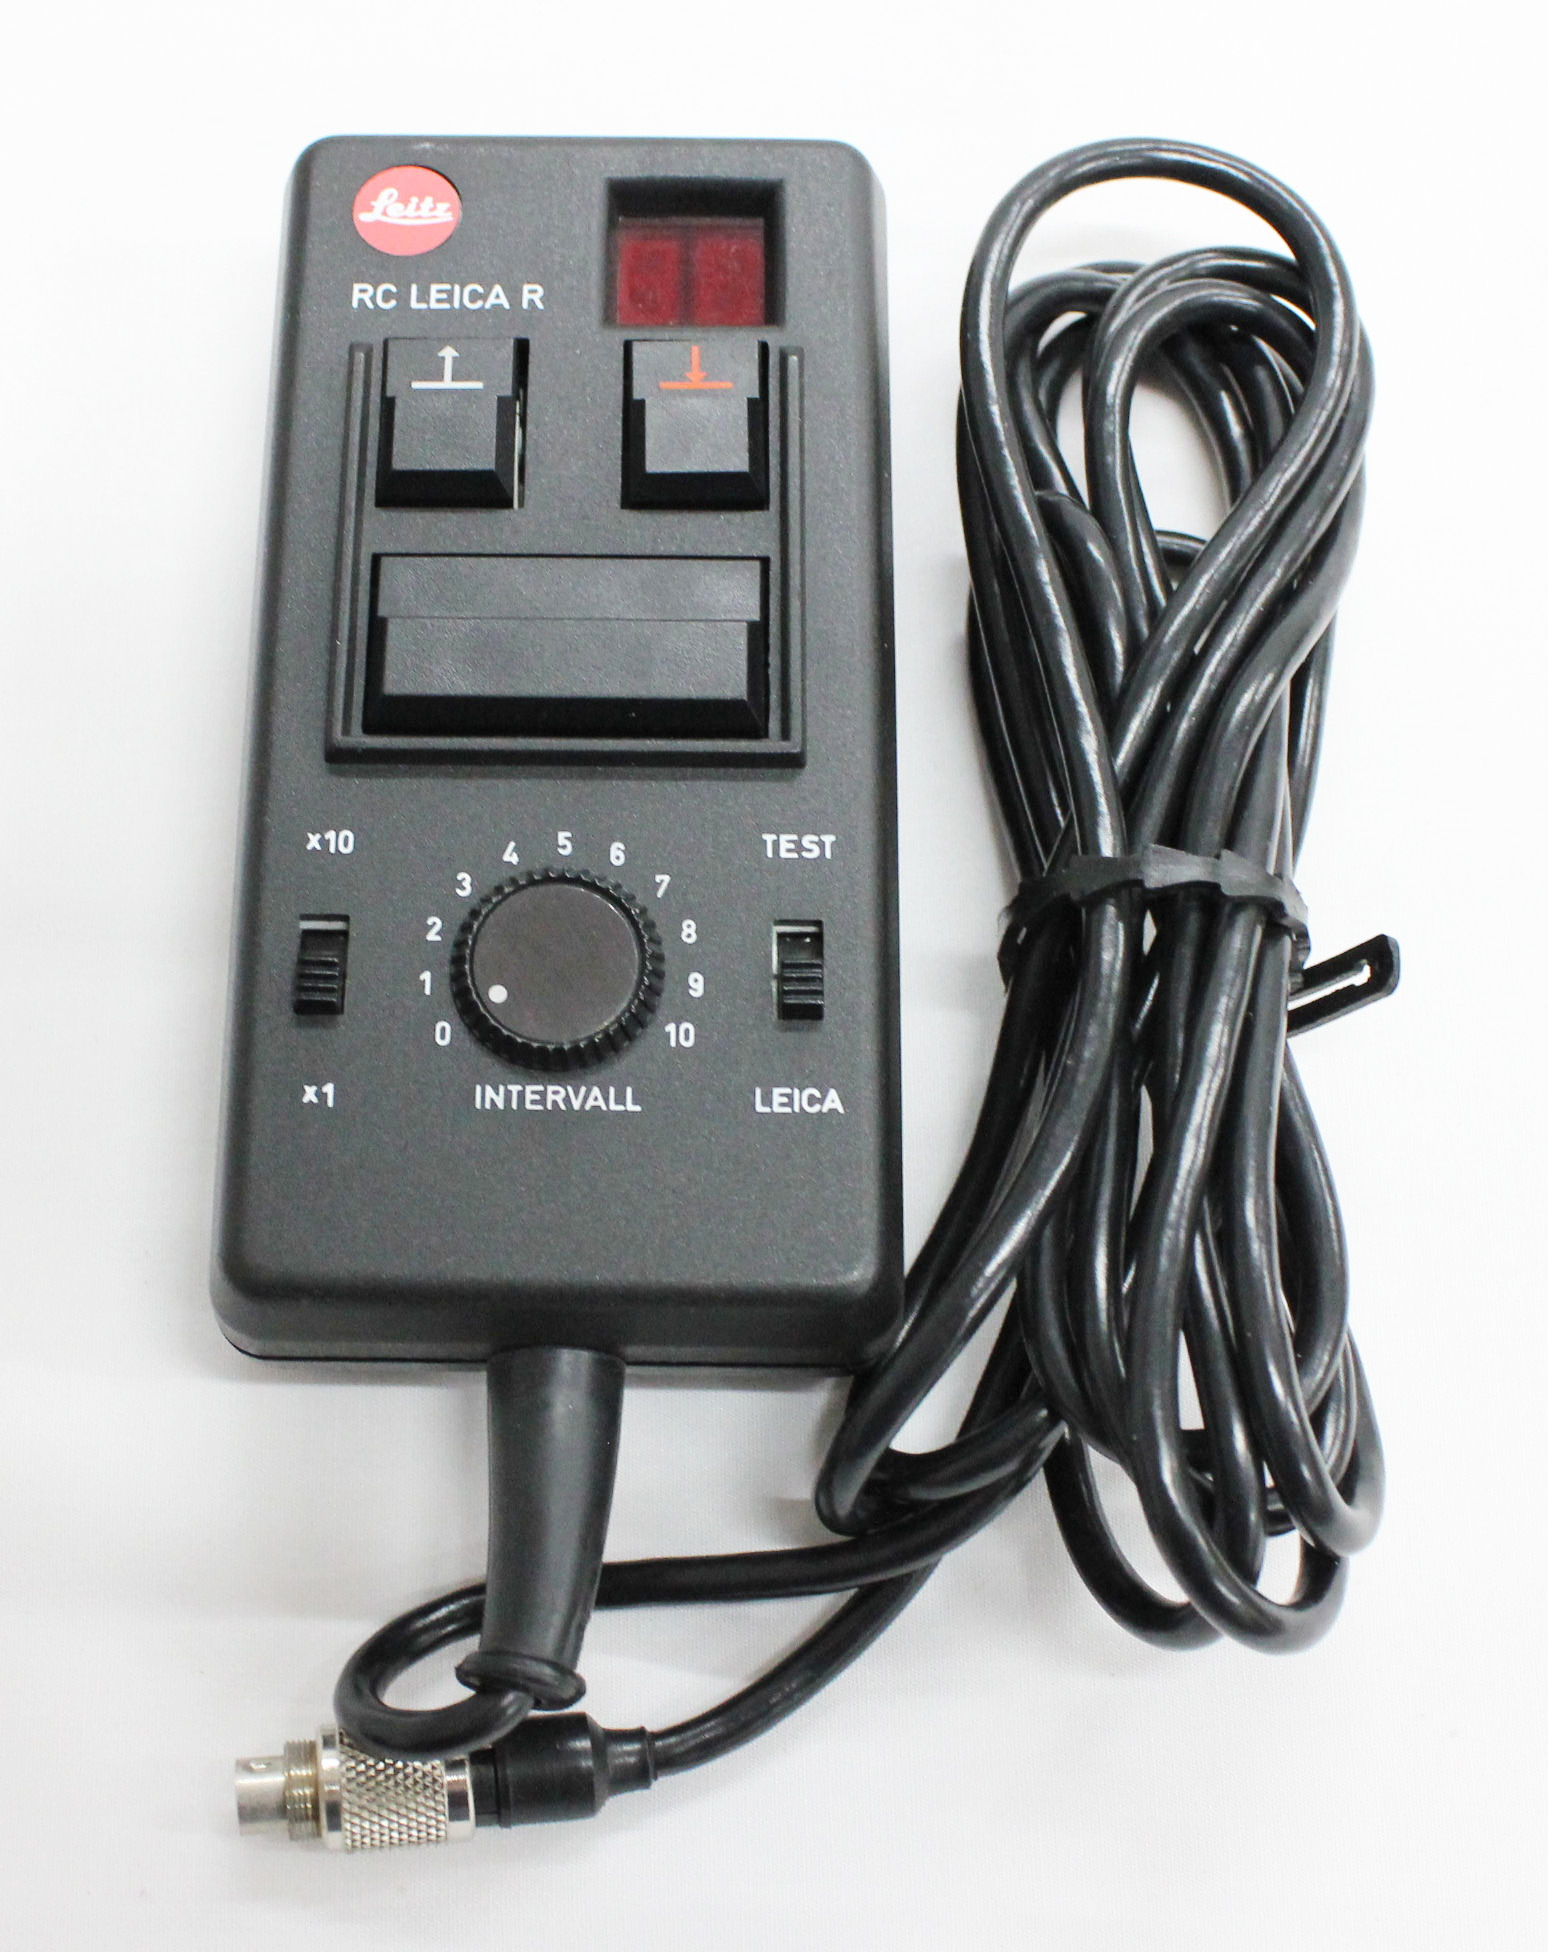 Japan Used Camera Shop | [Near Mint] Leitz; RC Leica R Remote Control for Winder & Motor Drive R from Japan